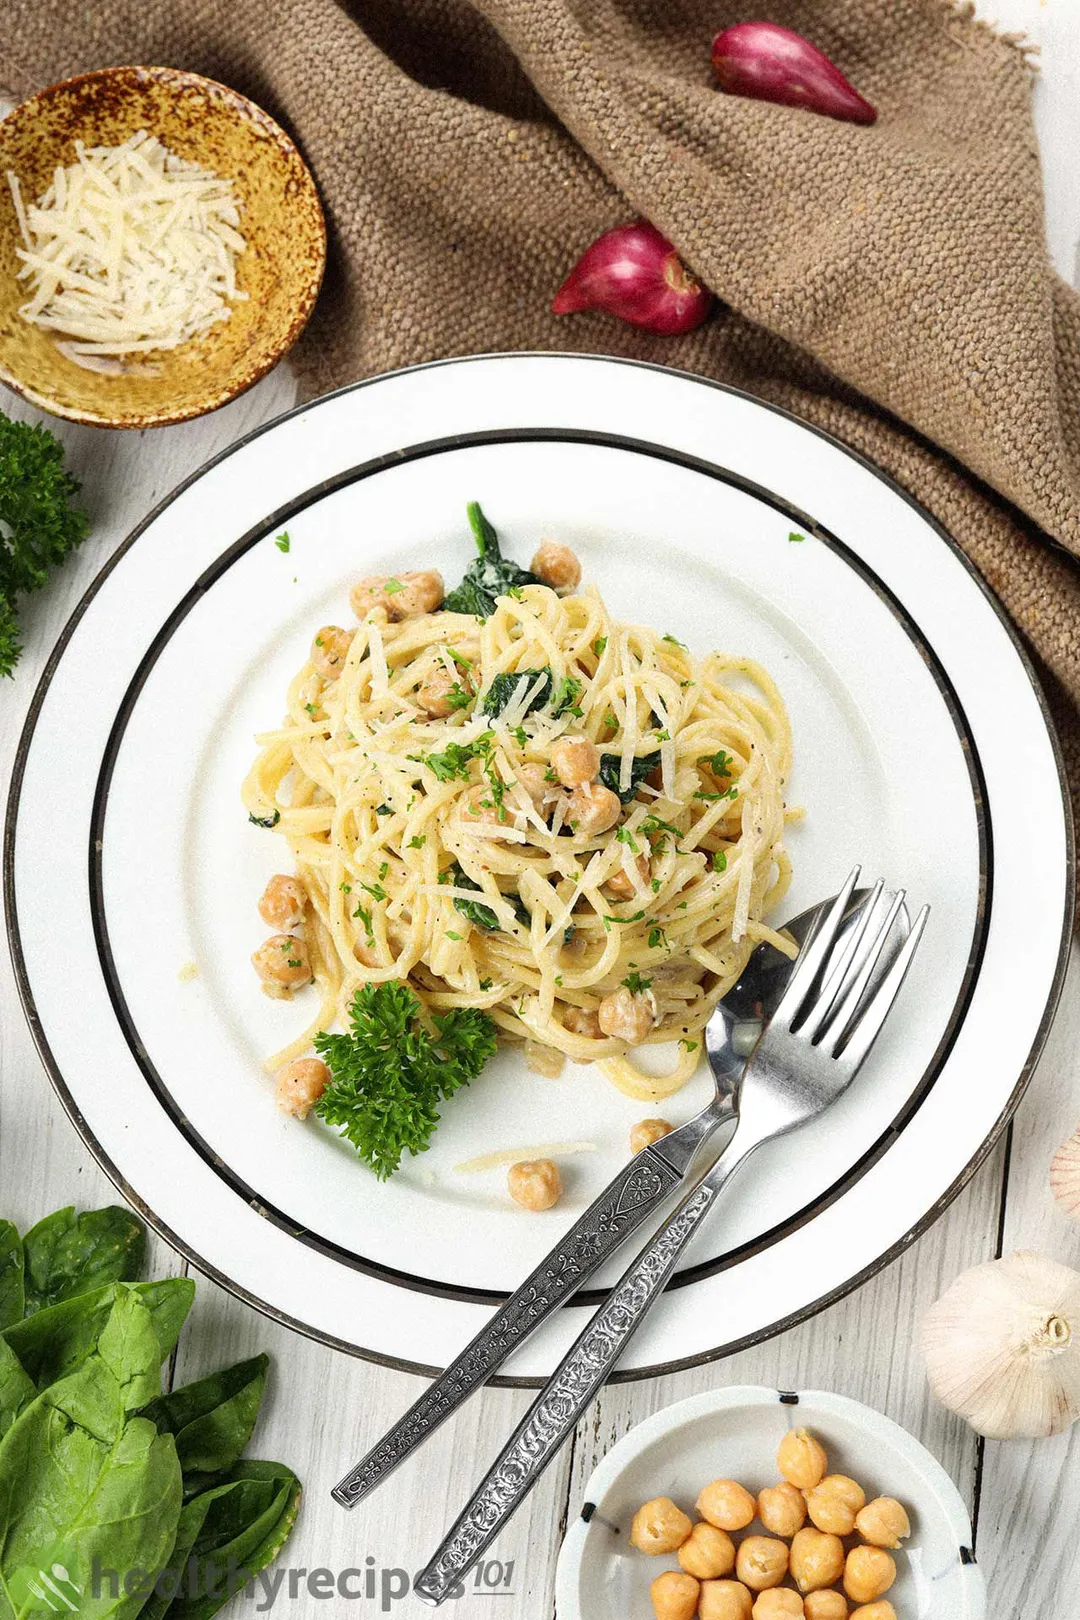 A round white plate containing chickpea pasta, a fork, and a spoon laid near a brown cloth, shallots, and garlic cloves